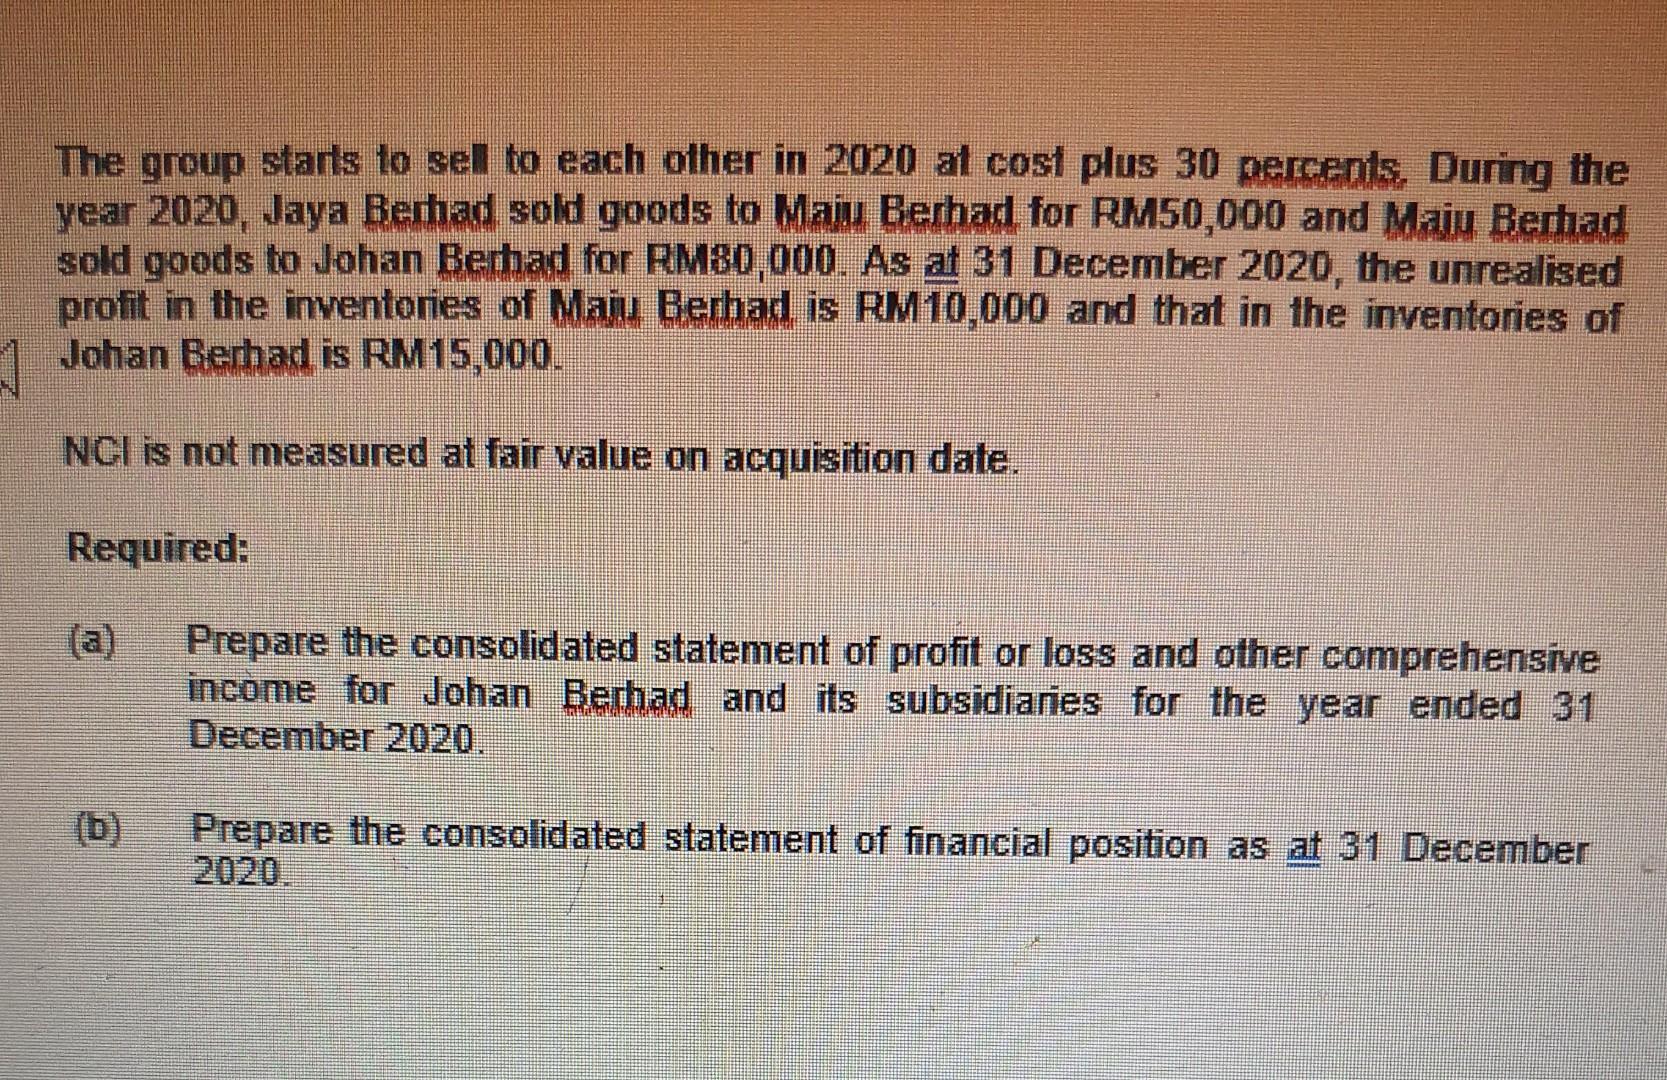 The group starts to sell to each other in 2020 at cost plus 30 percents. During the year 2020, Jaya Berhad sold goods to Maju